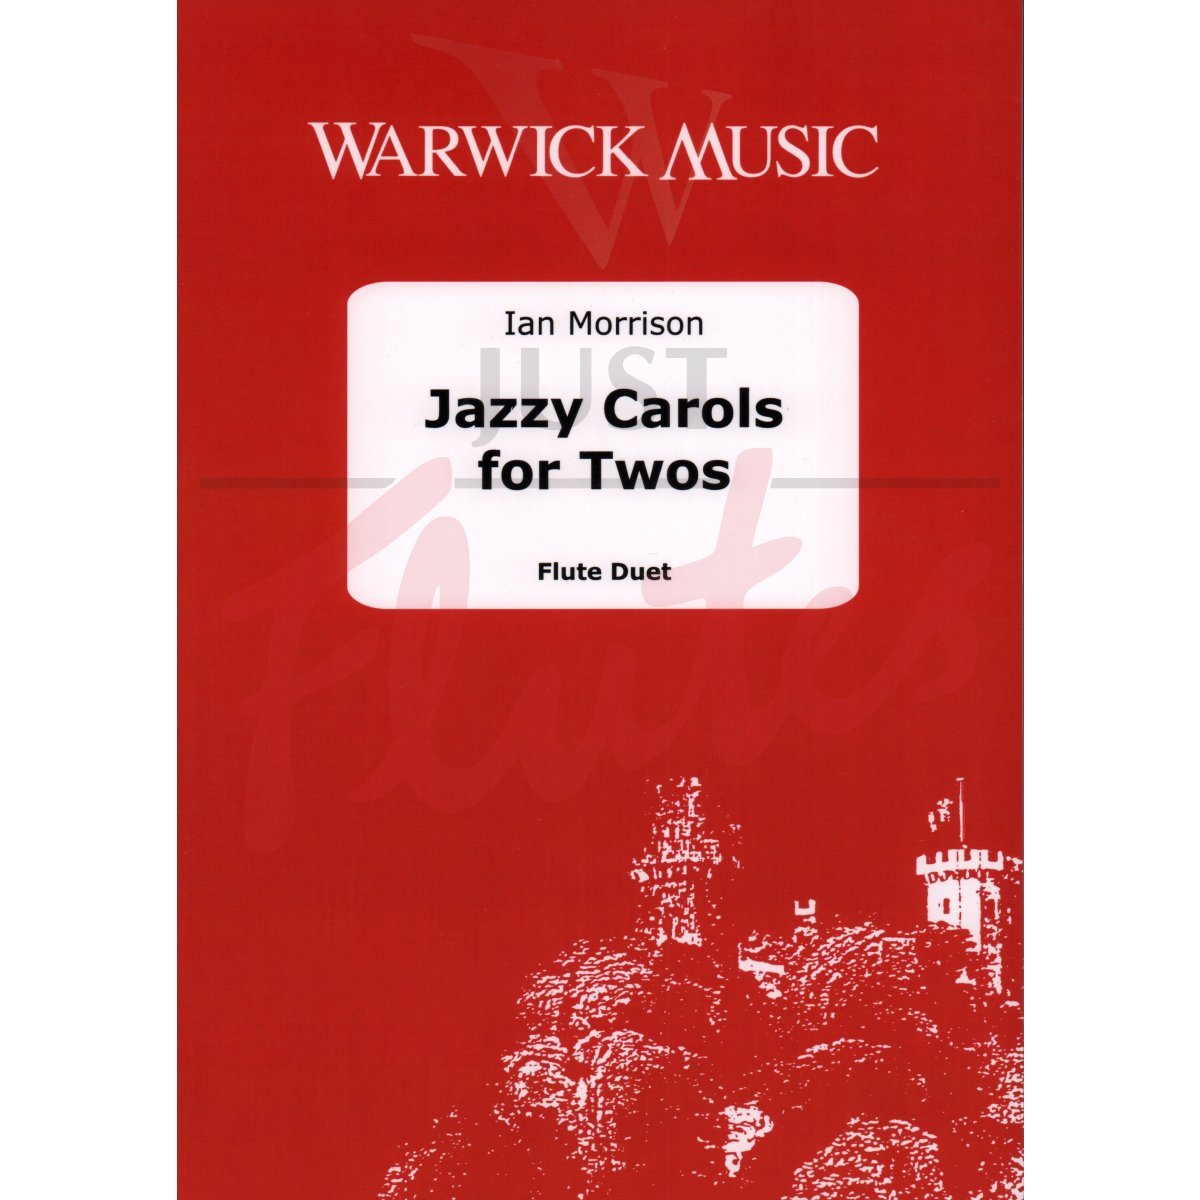 Jazzy Carols for Twos for Flute Duet